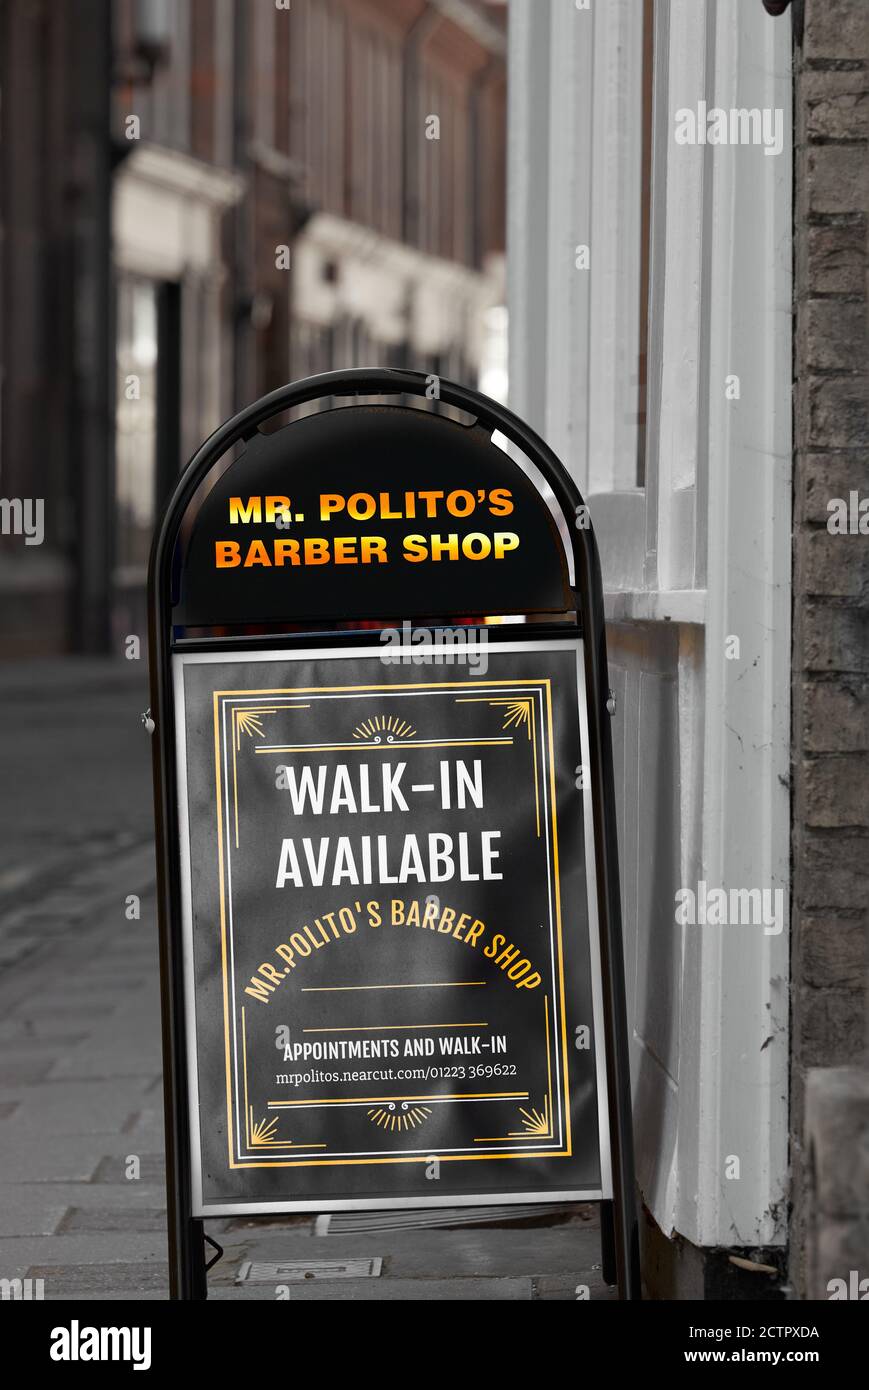 Mr Polito's barber shop (Cmbridge, England) open for appointments and walk-ins during the coronavirus crisis, September 2020. Stock Photo